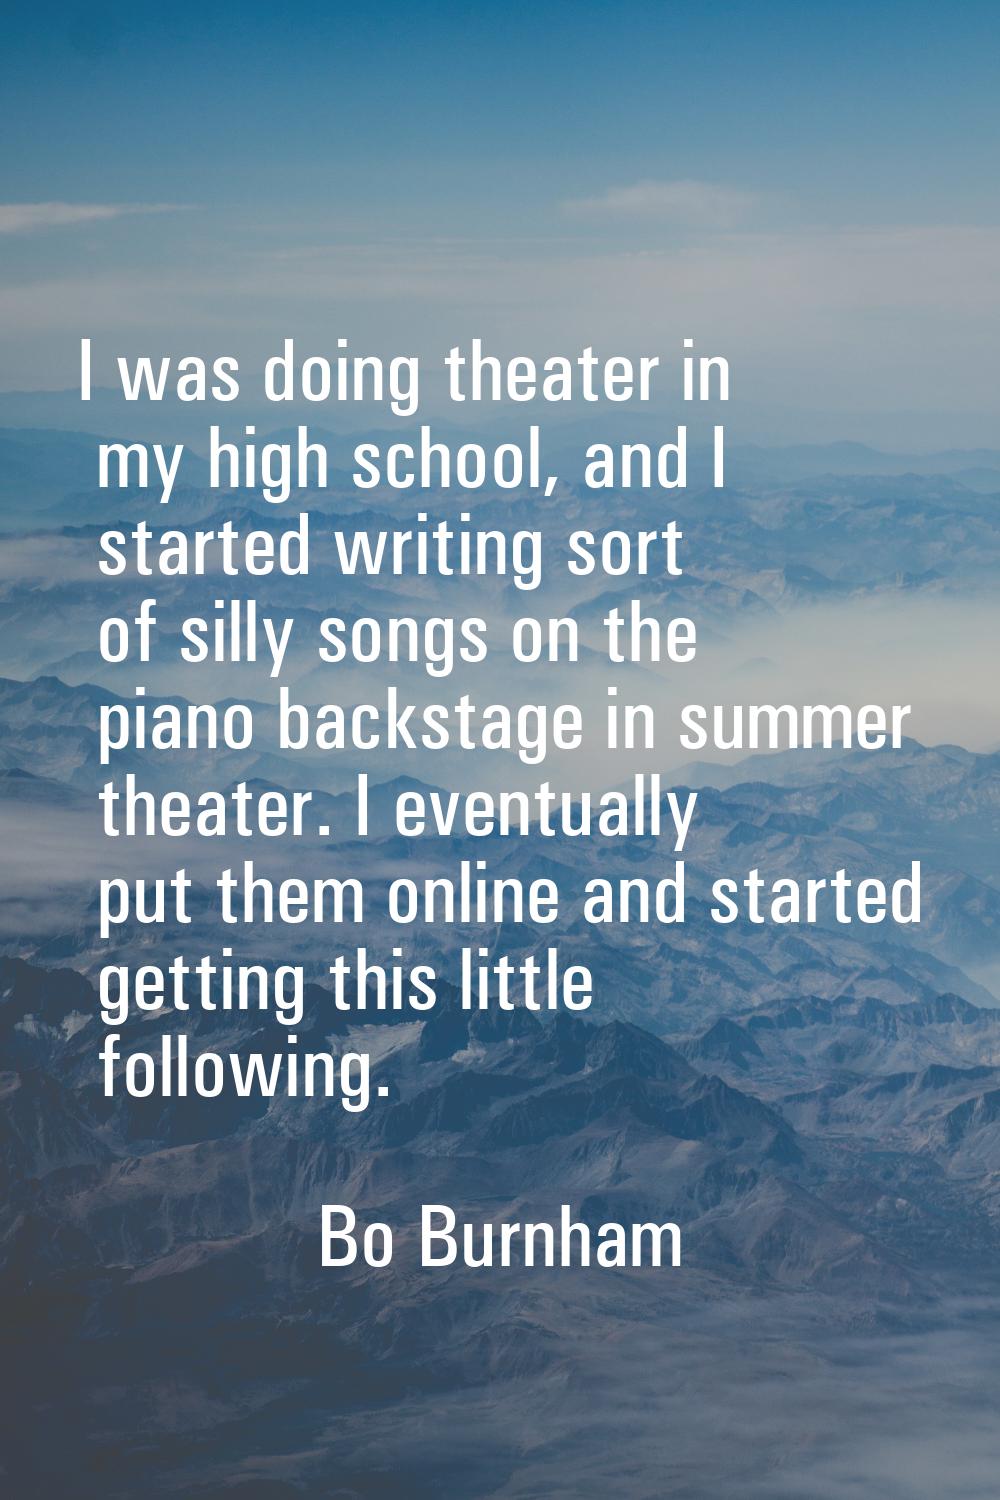 I was doing theater in my high school, and I started writing sort of silly songs on the piano backs